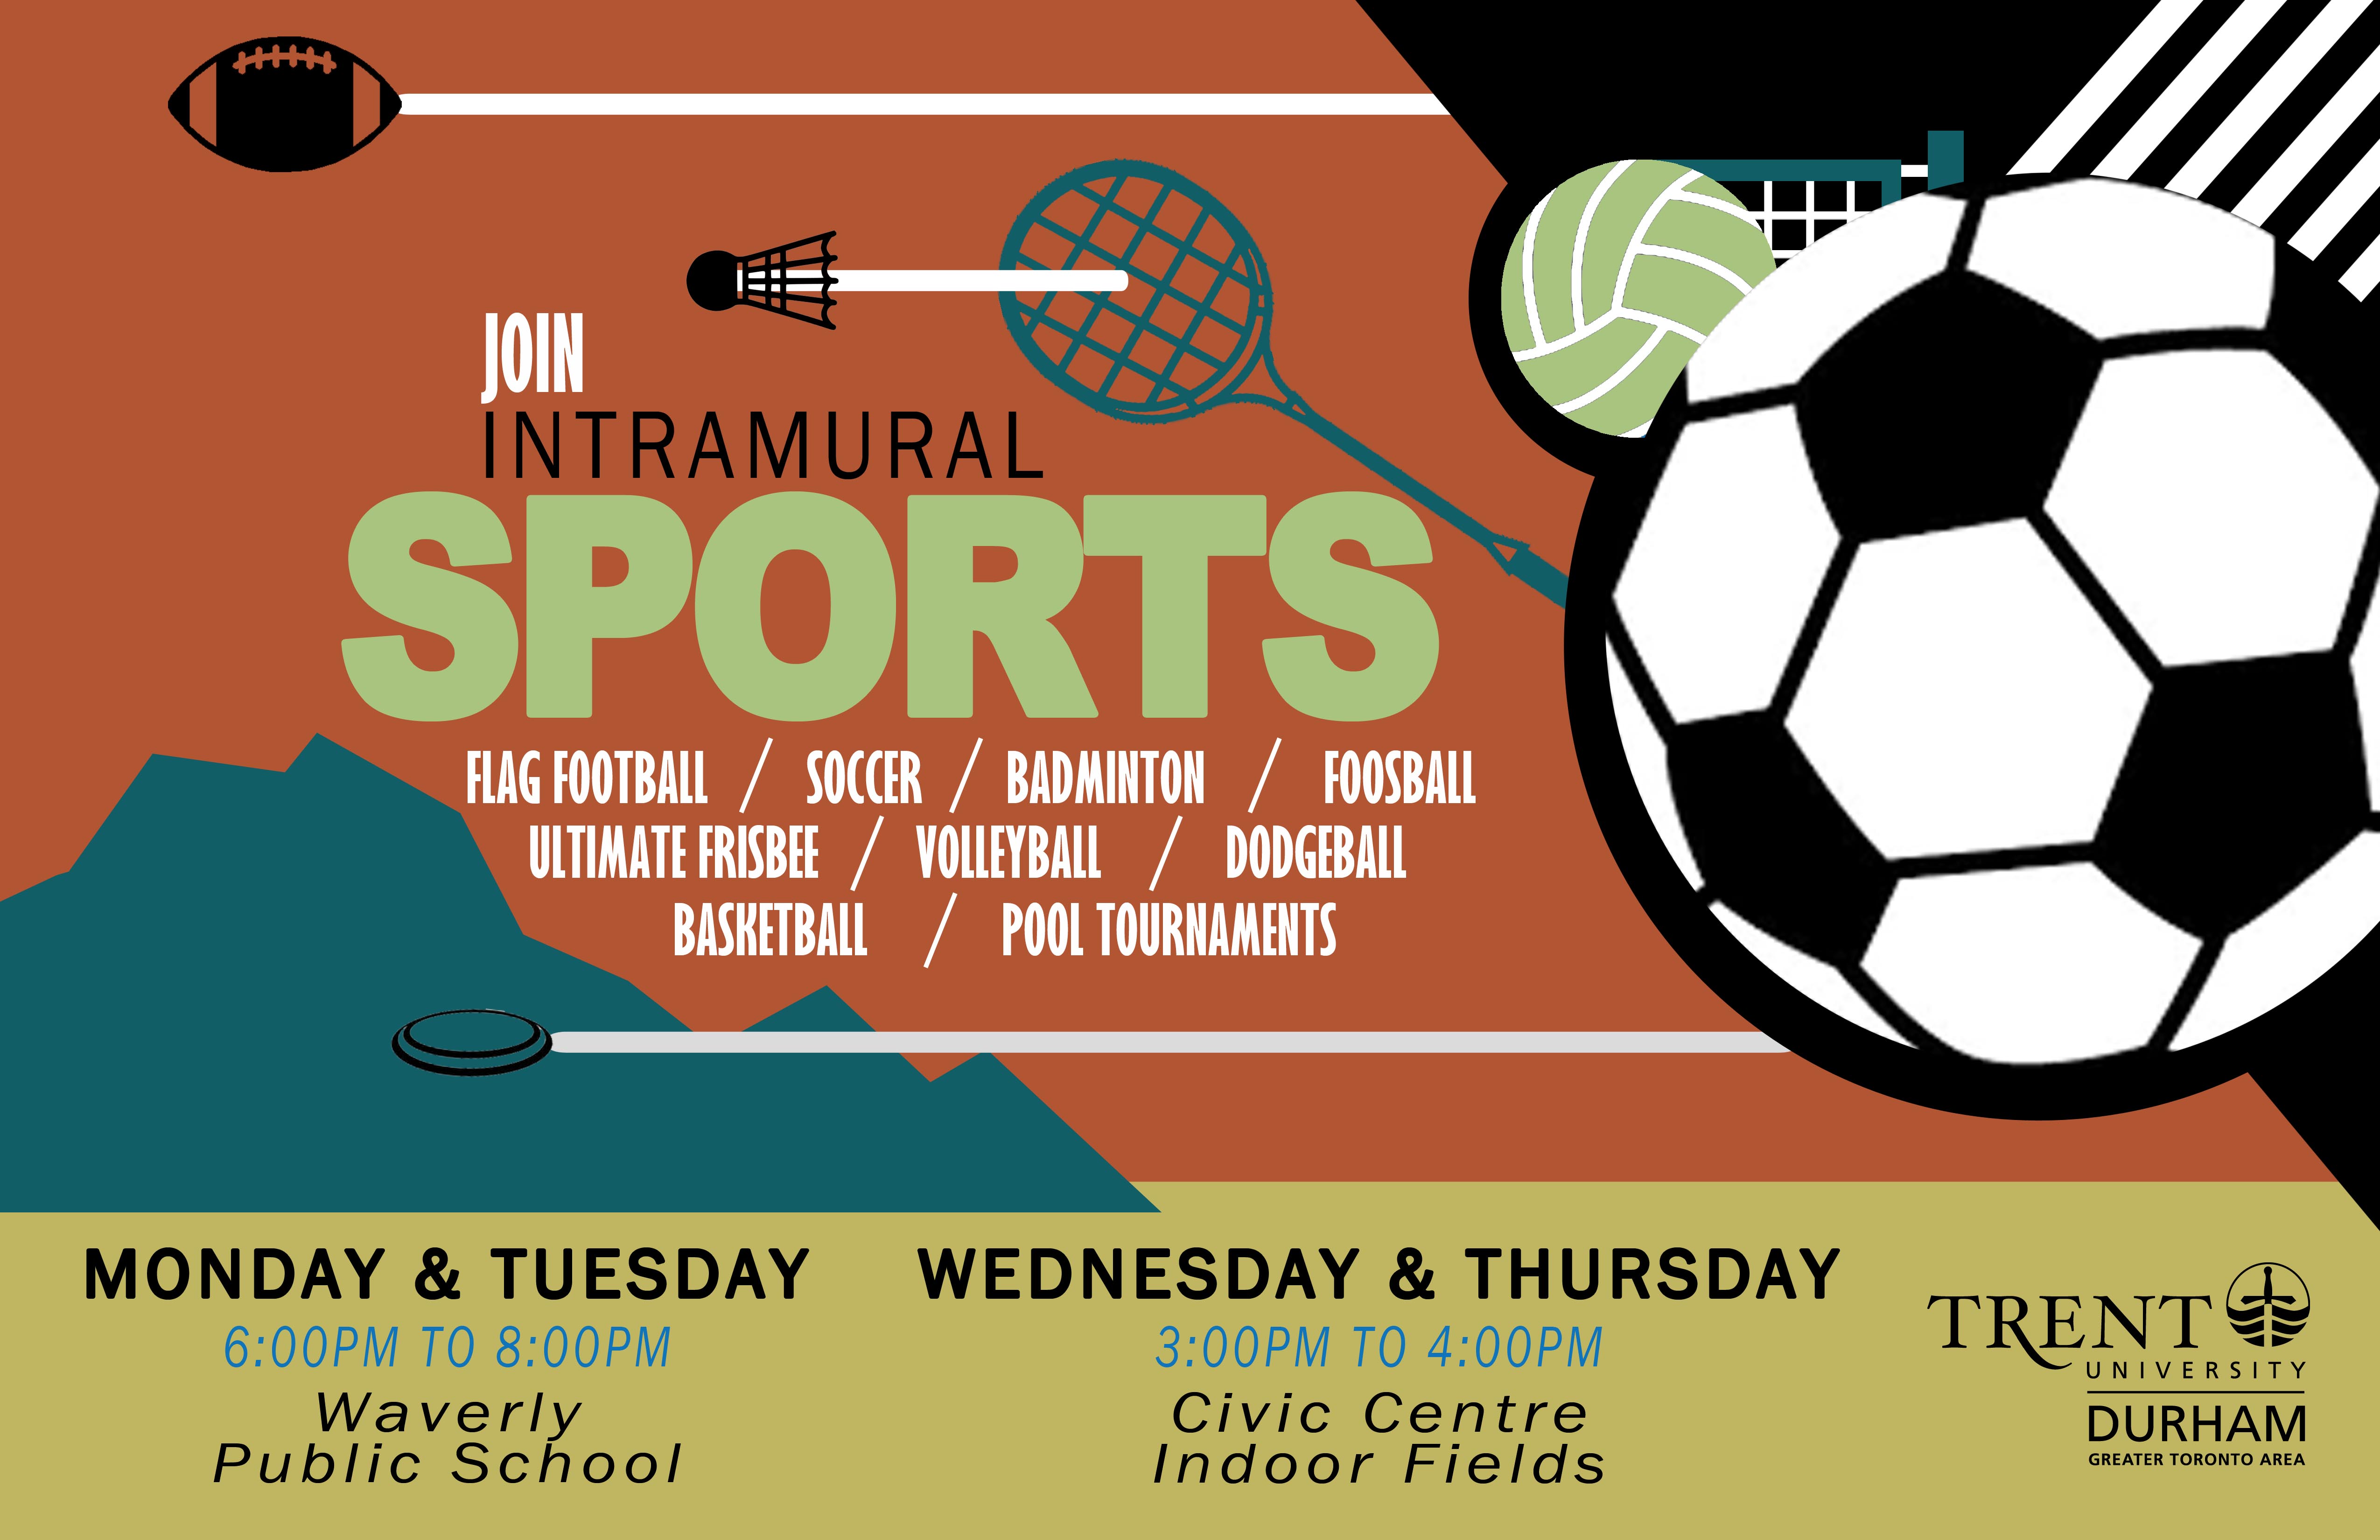 Intramural Sports, Monday and Tuesday 6pm to 8pm at Waverly P.S., Wednesday and Thursday 3pm to 4pm at the Civic Centre